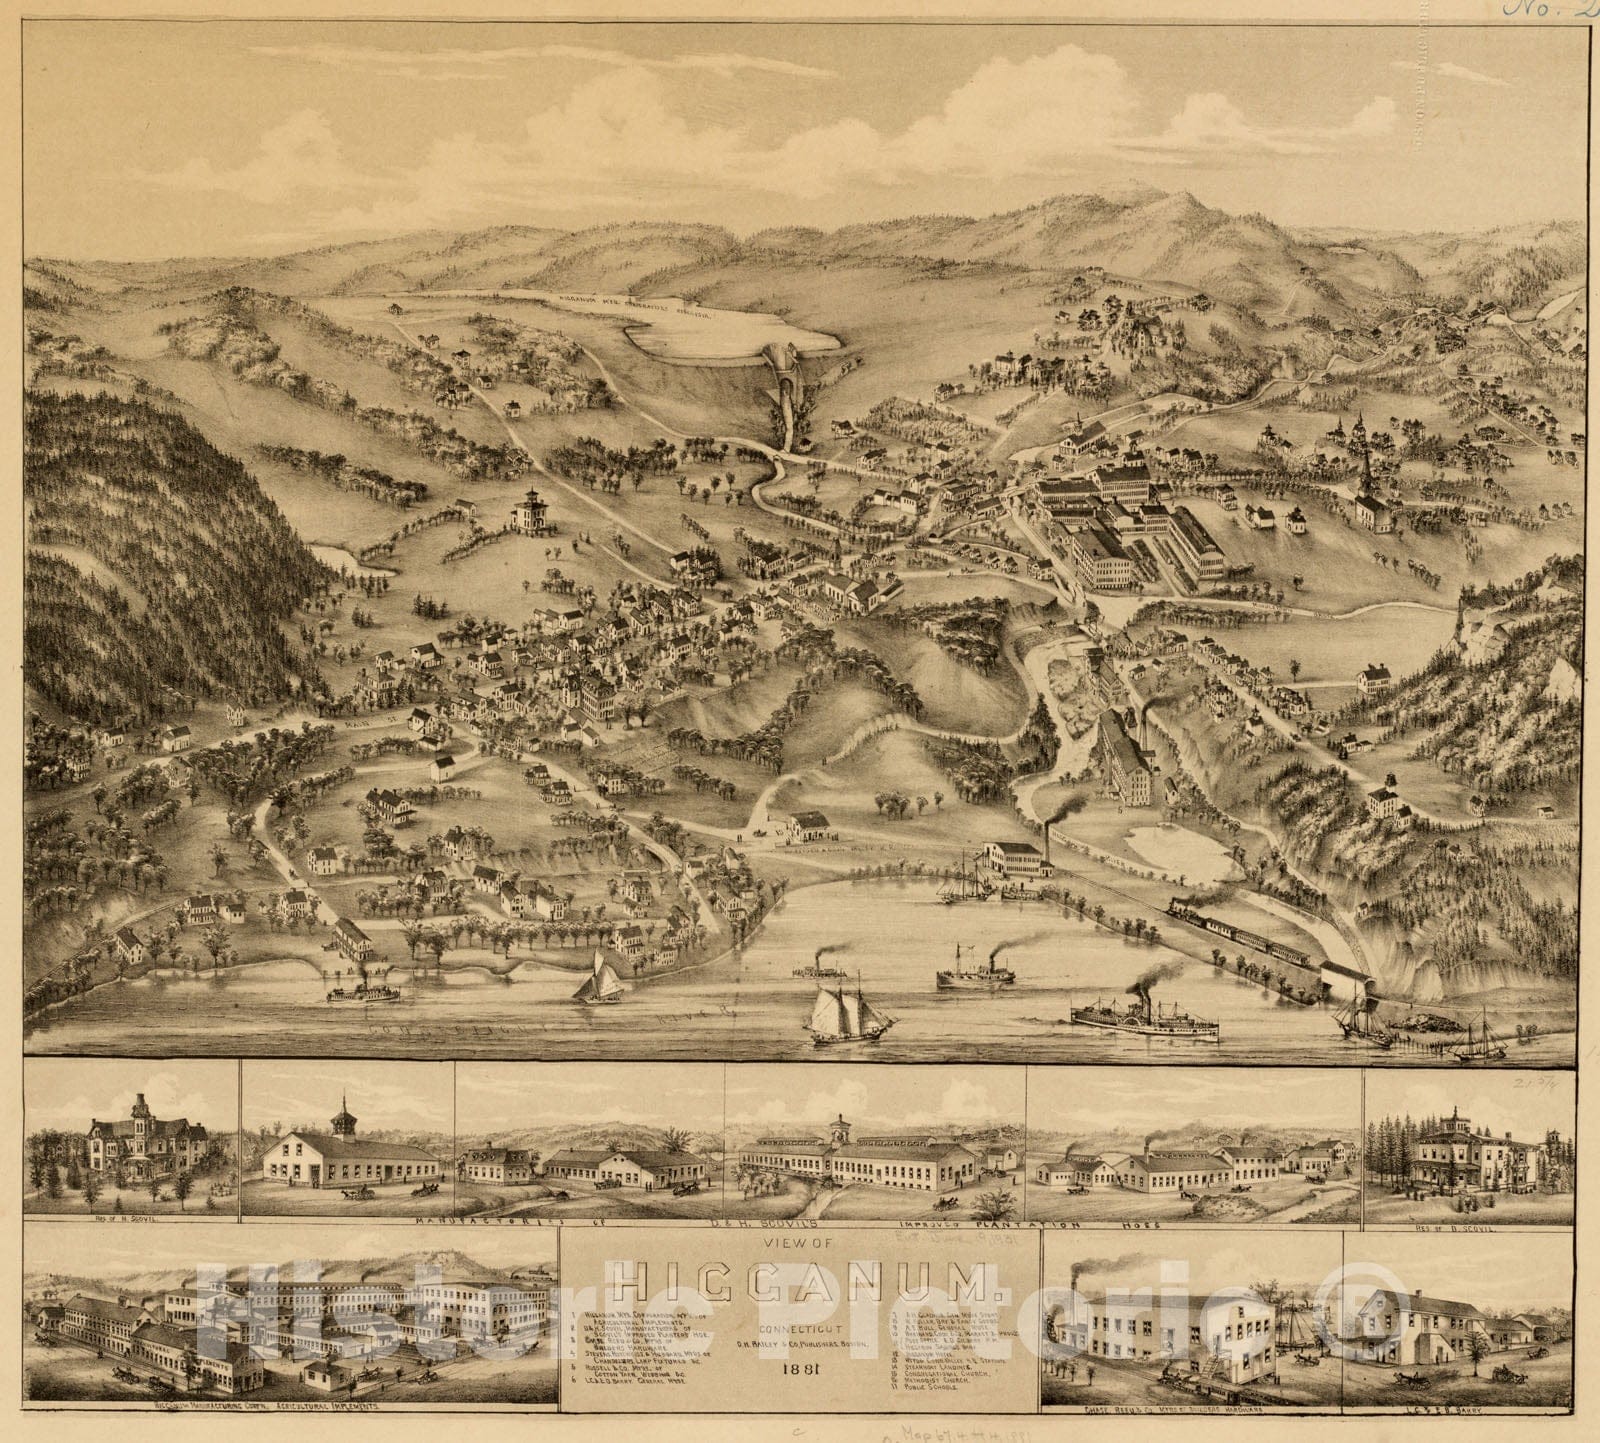 Historical Map, View of Higganum, Connecticut : 1881, Vintage Wall Art